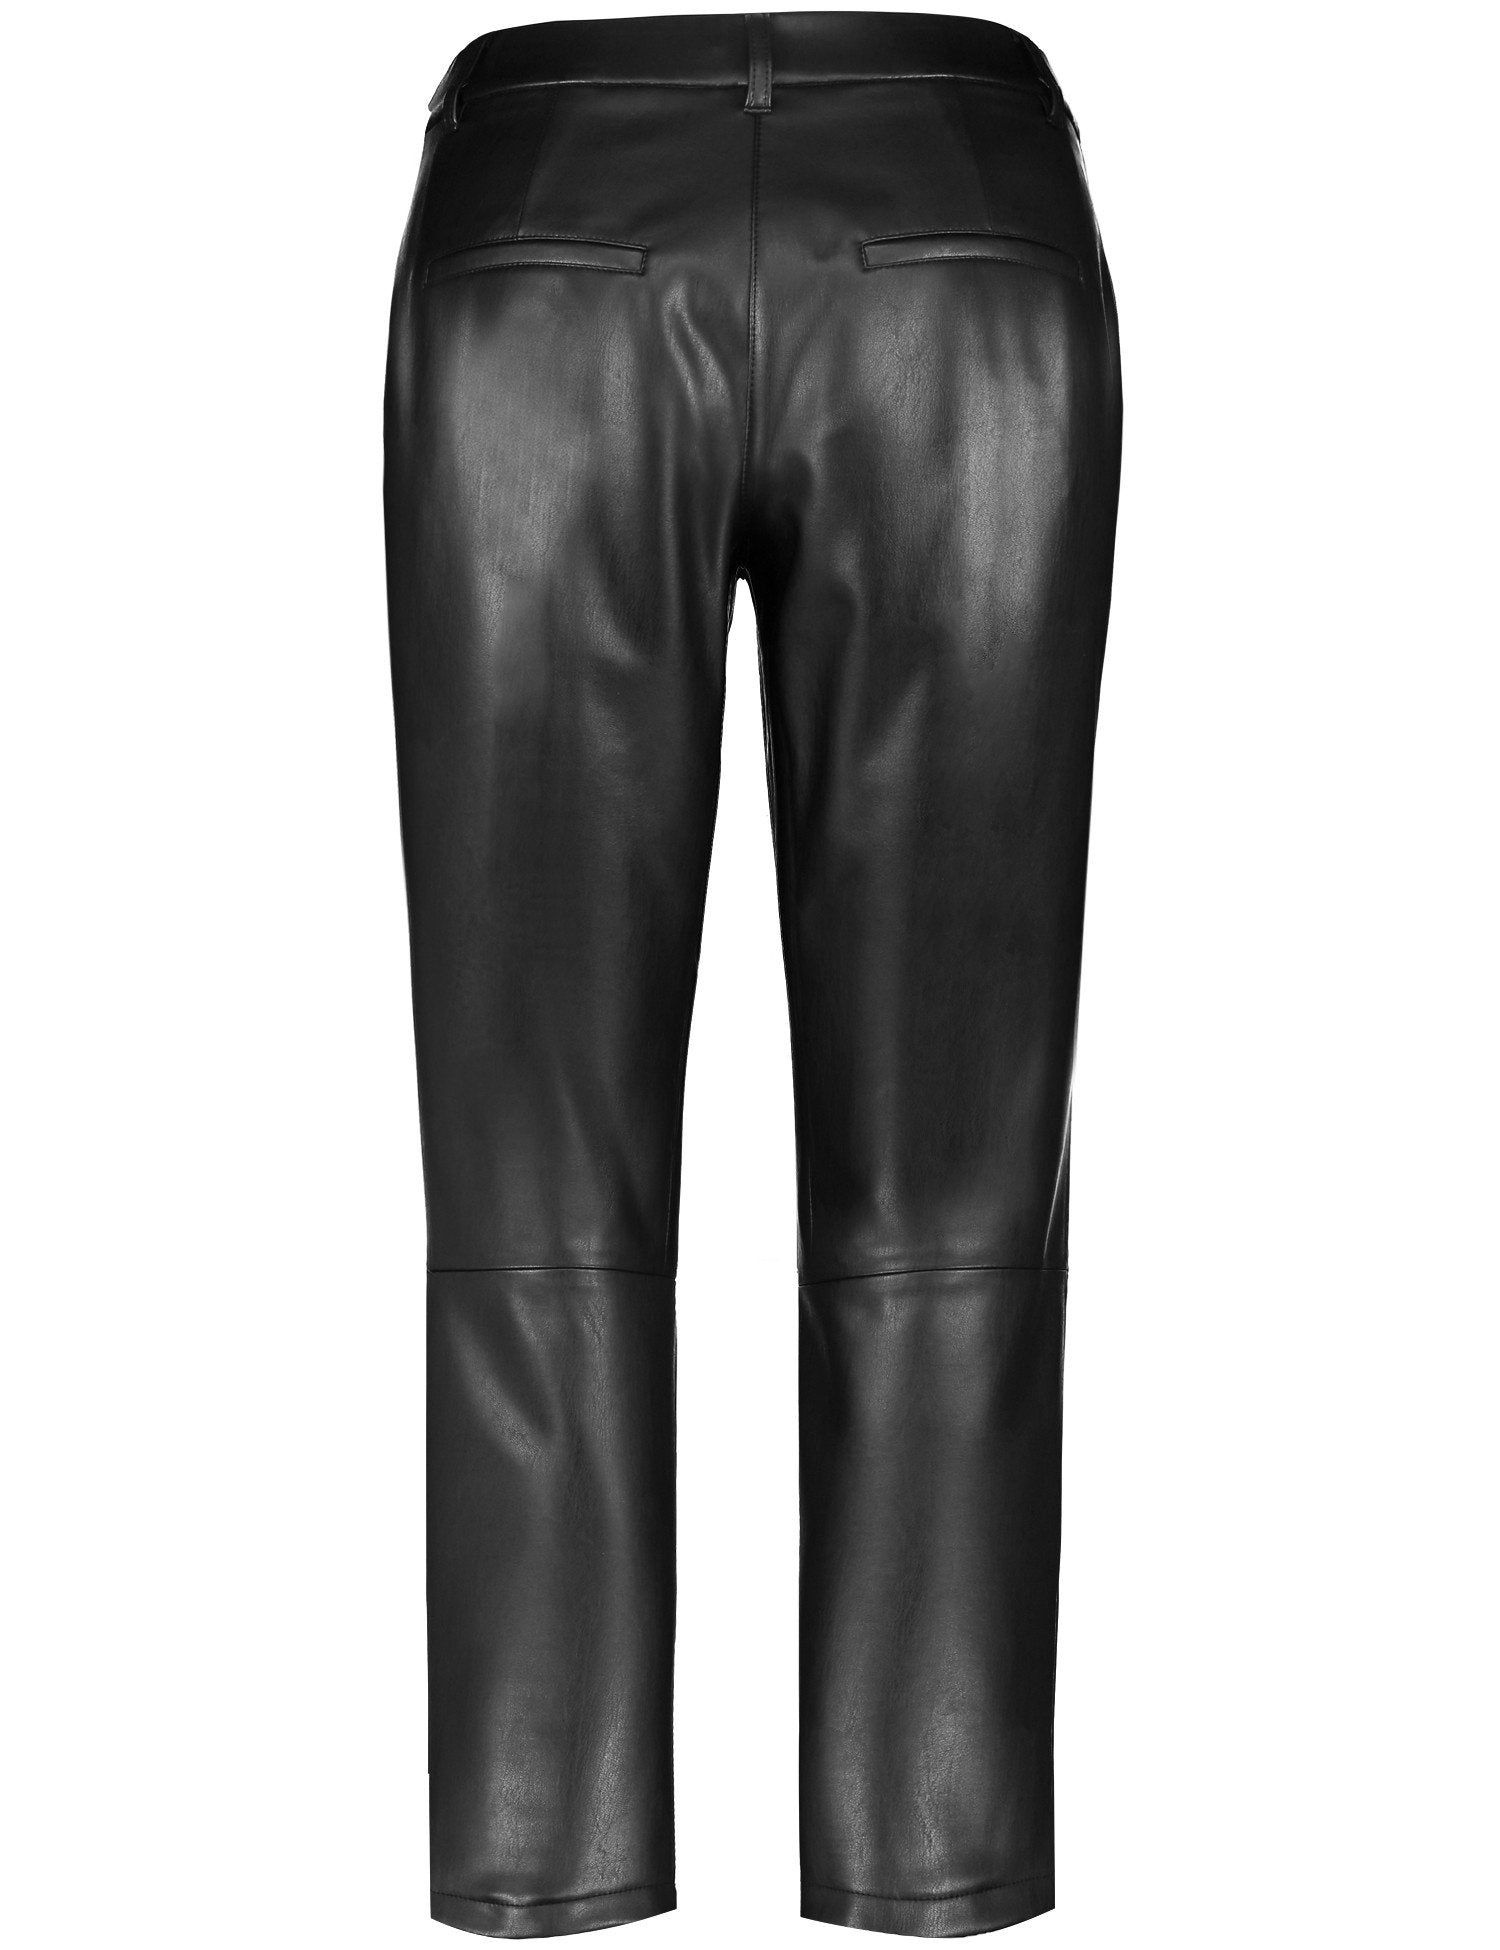 City Style 7/8 Length Faux Leather Trousers_122017-66778_11000_03